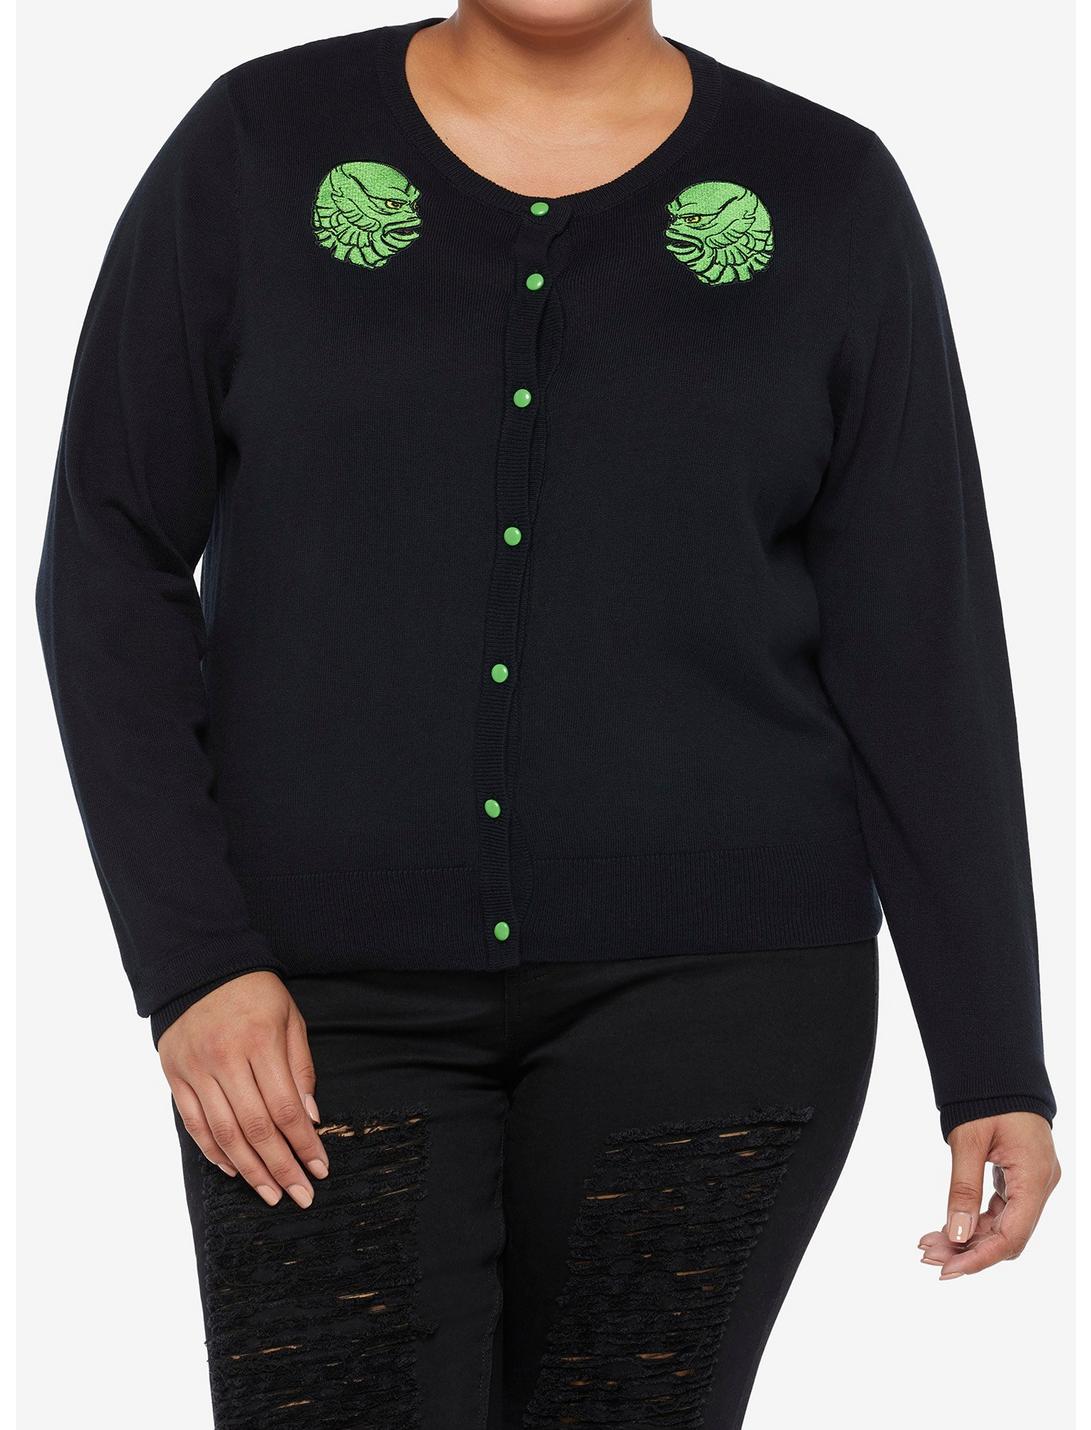 Universal Monsters Creature From The Black Lagoon Cardigan Plus Size, BLACK  GREEN, hi-res